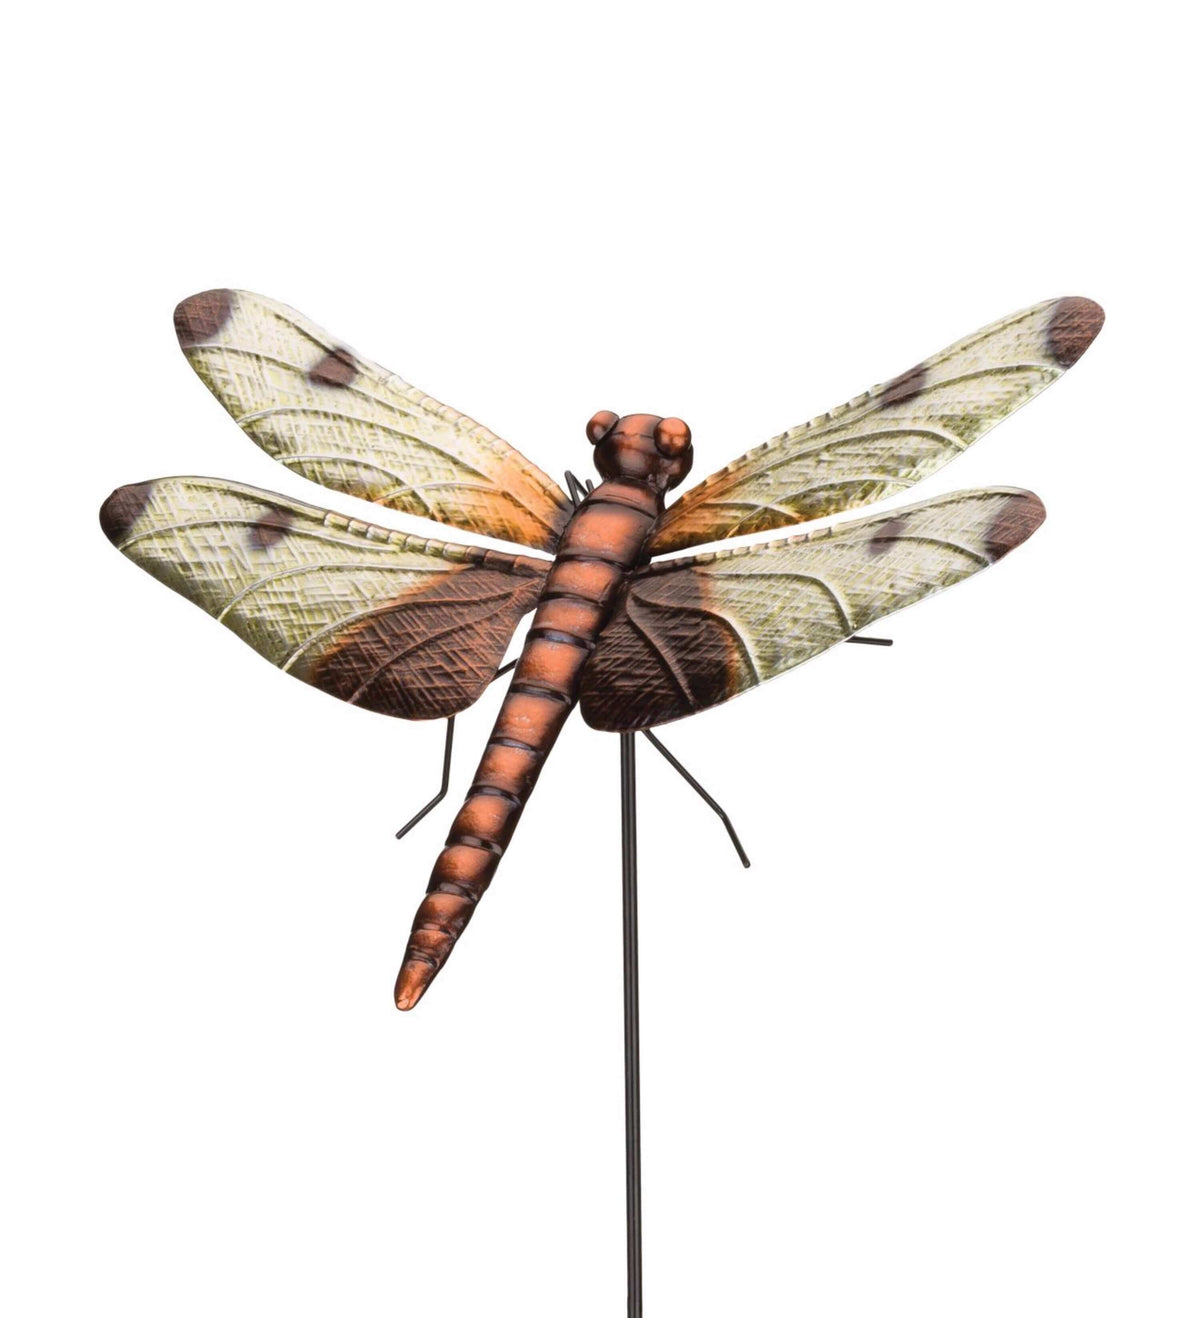 Calico Dragonfly 46 Inch Wall Decor or Stake